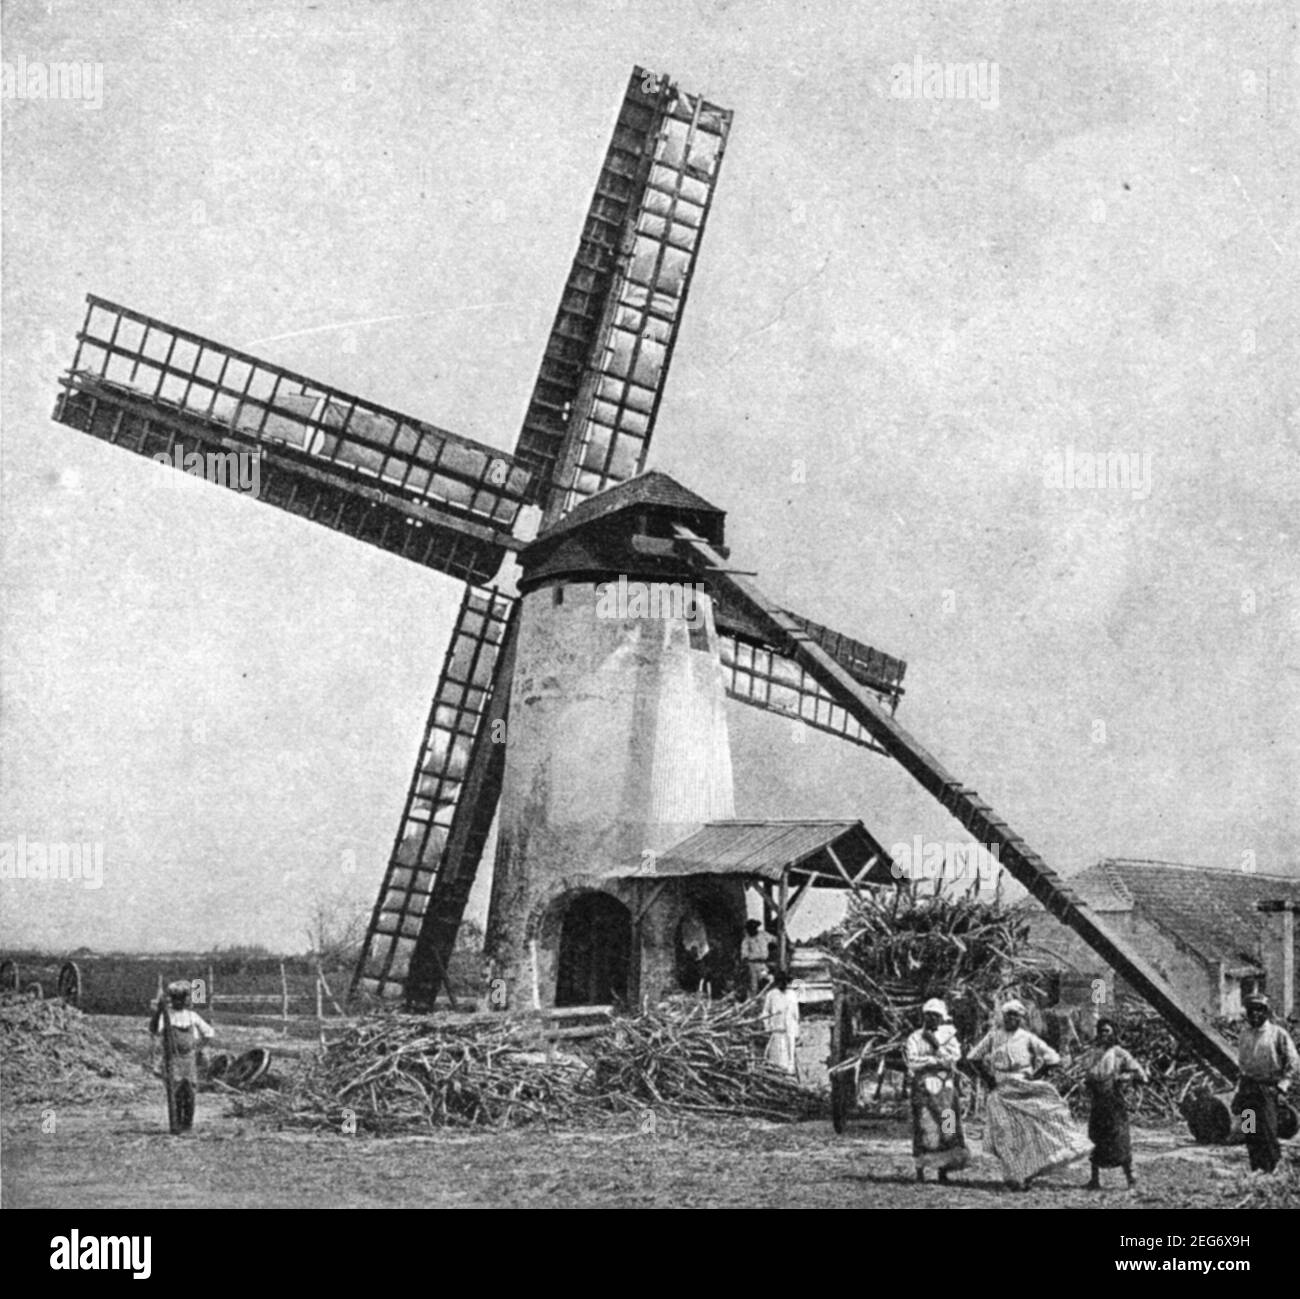 Early 20th century photo of Barbadian men and women working with a wind powered mill for crushing sugar cane in the sugar cane fields of Barbados circa early 1900s during the period when the island was a British colony Stock Photo